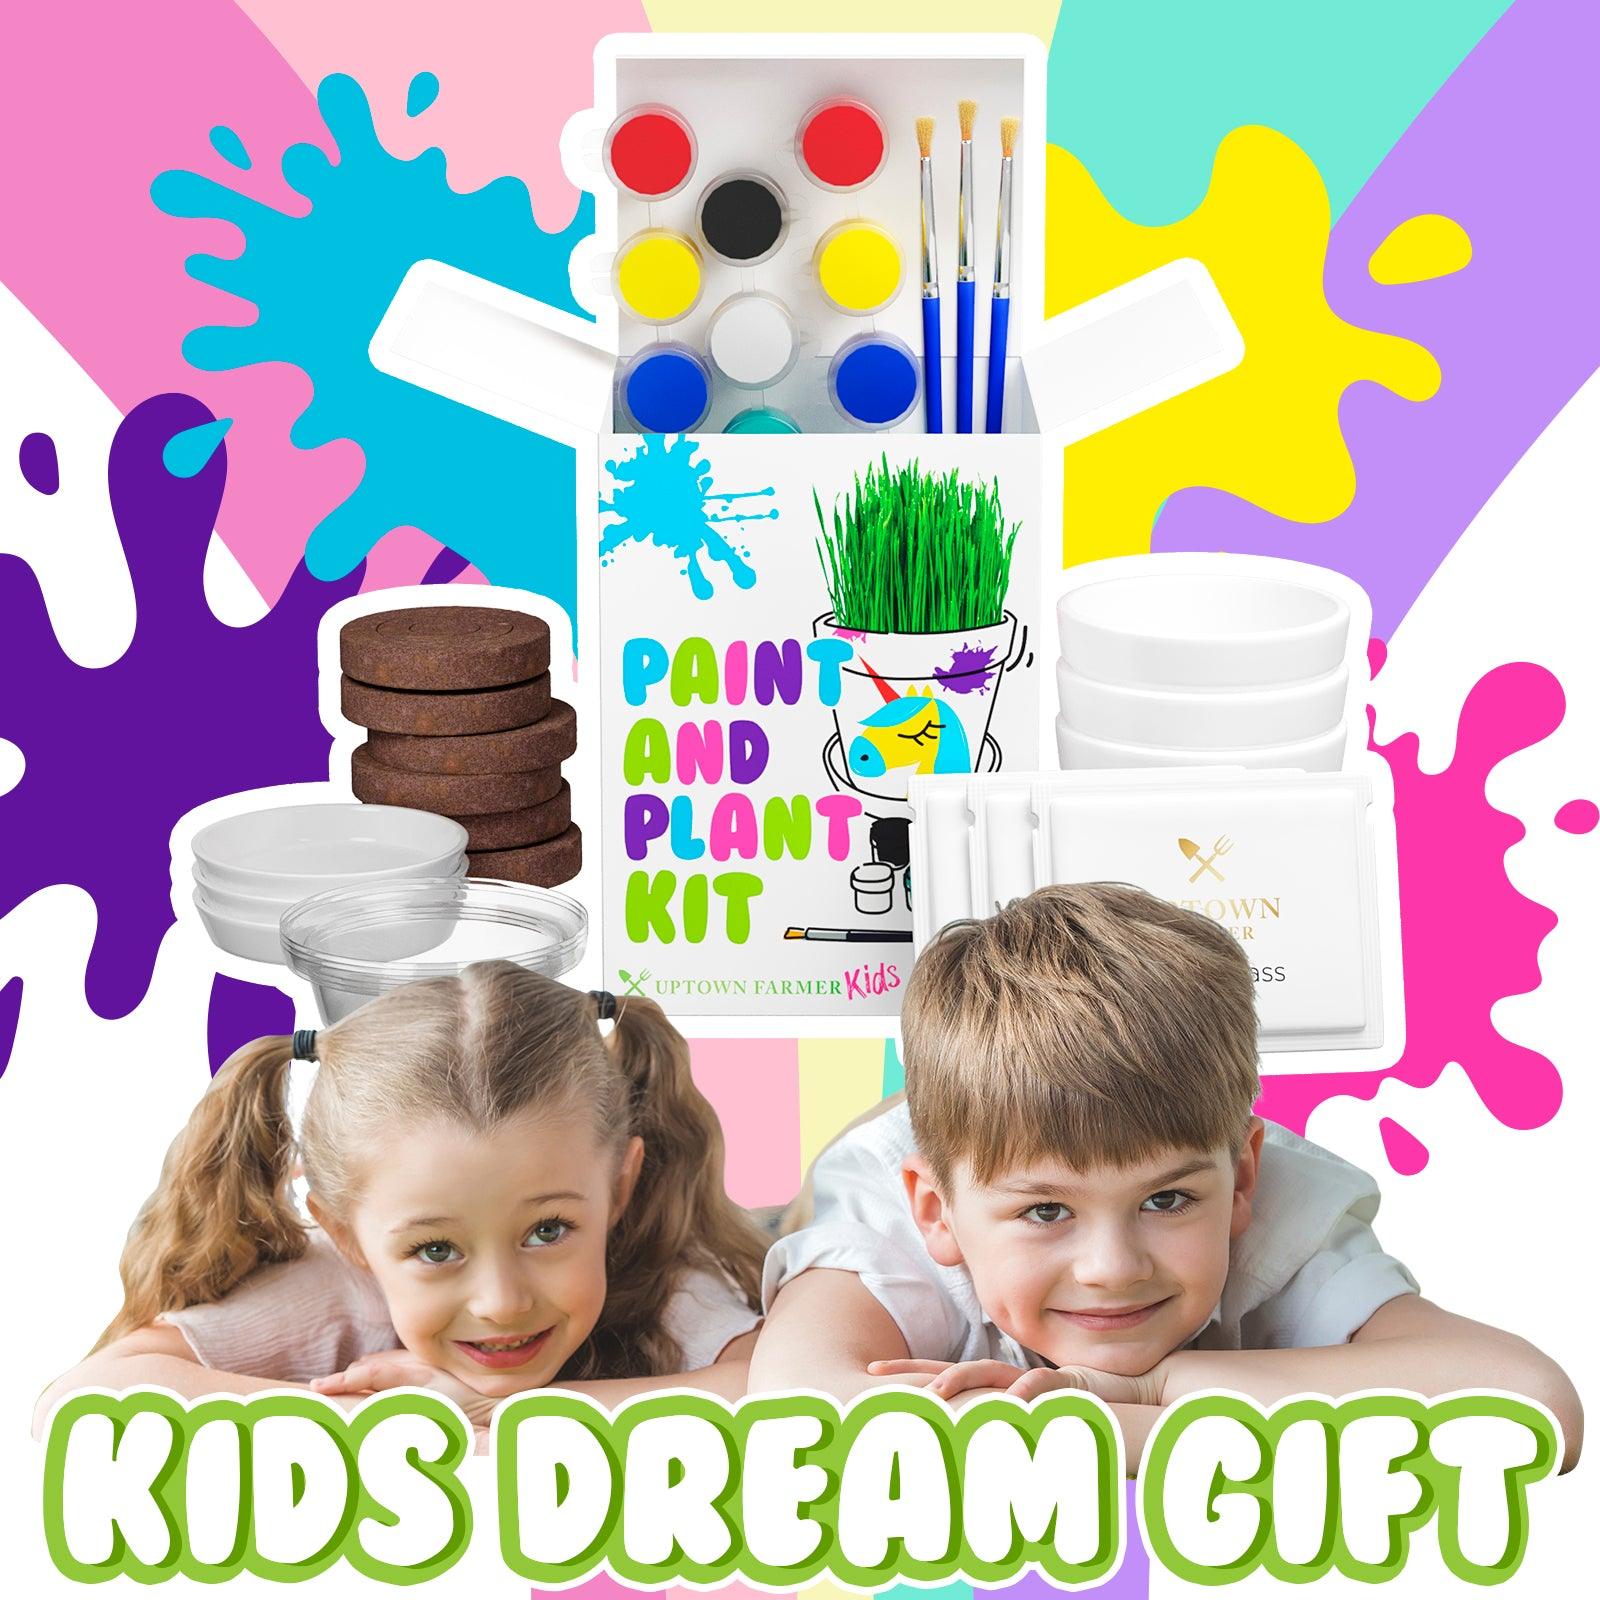 Paint & Plant Kids Flower Pot Growing Kit with USA Seeds - Uptown Farmer